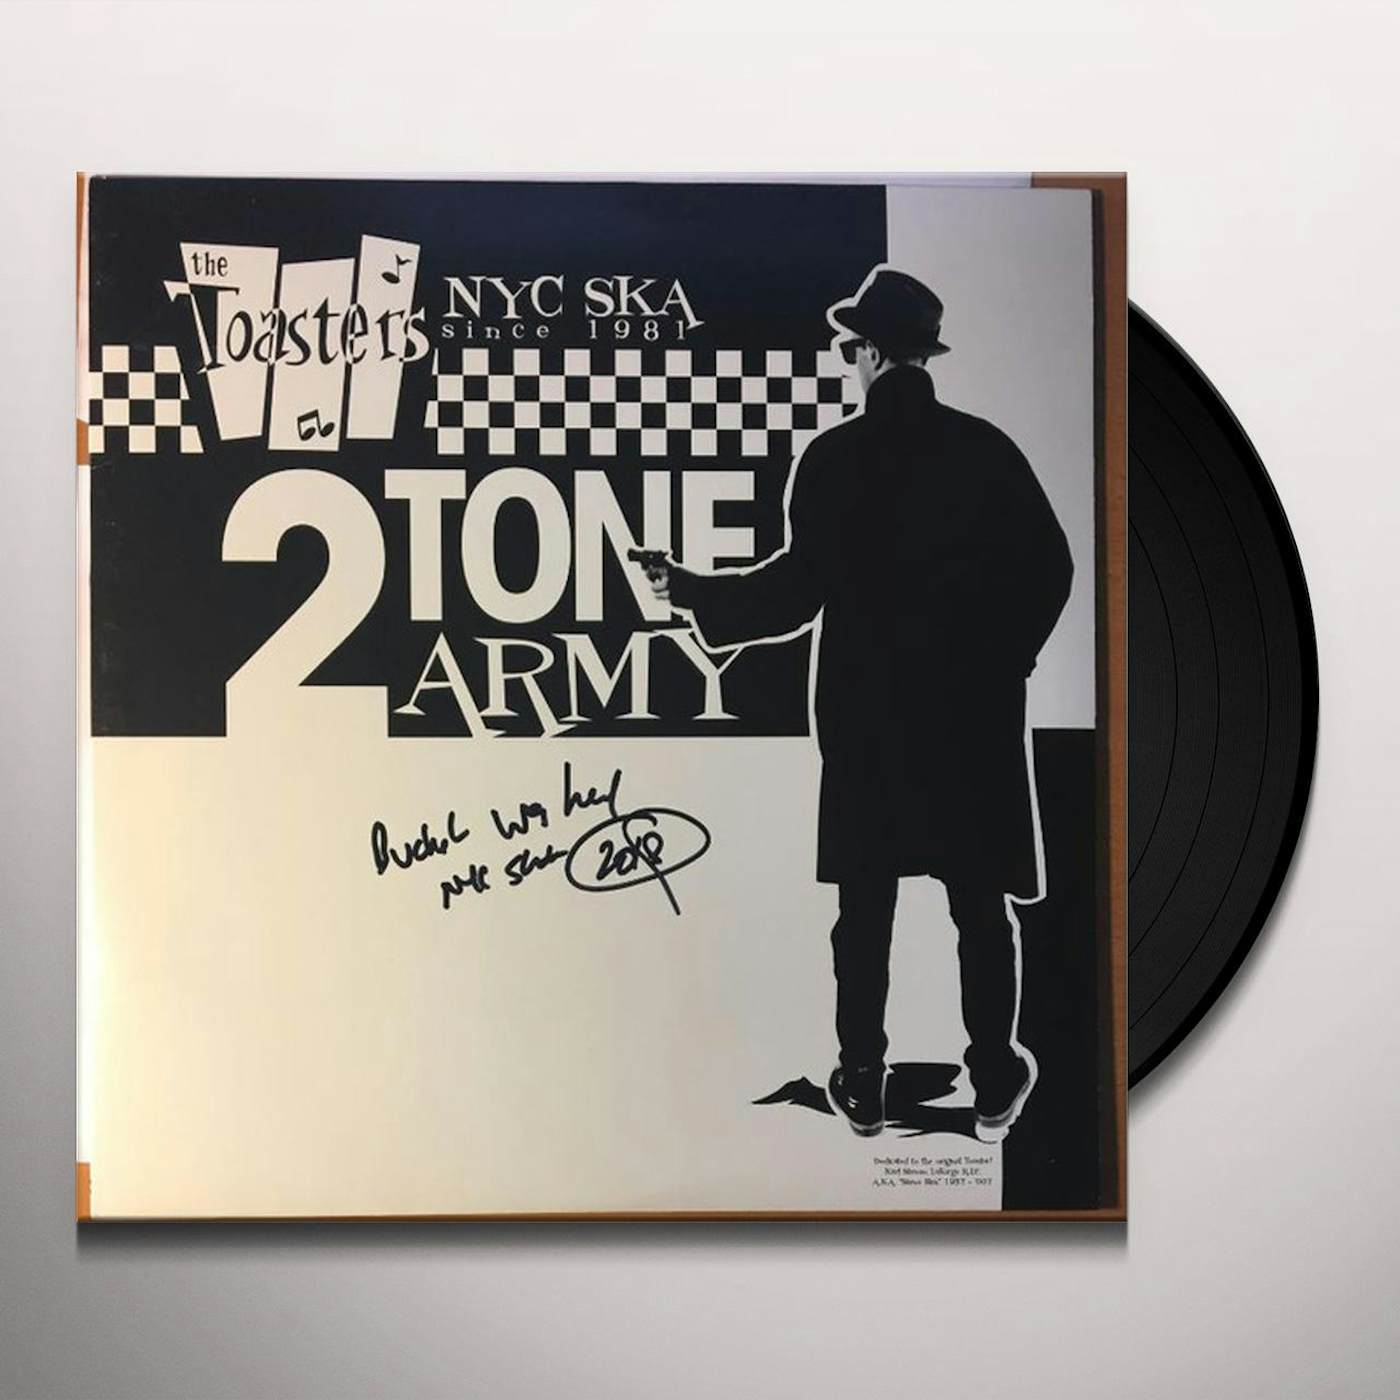 The Toasters 2 TONE ARMY Vinyl Record